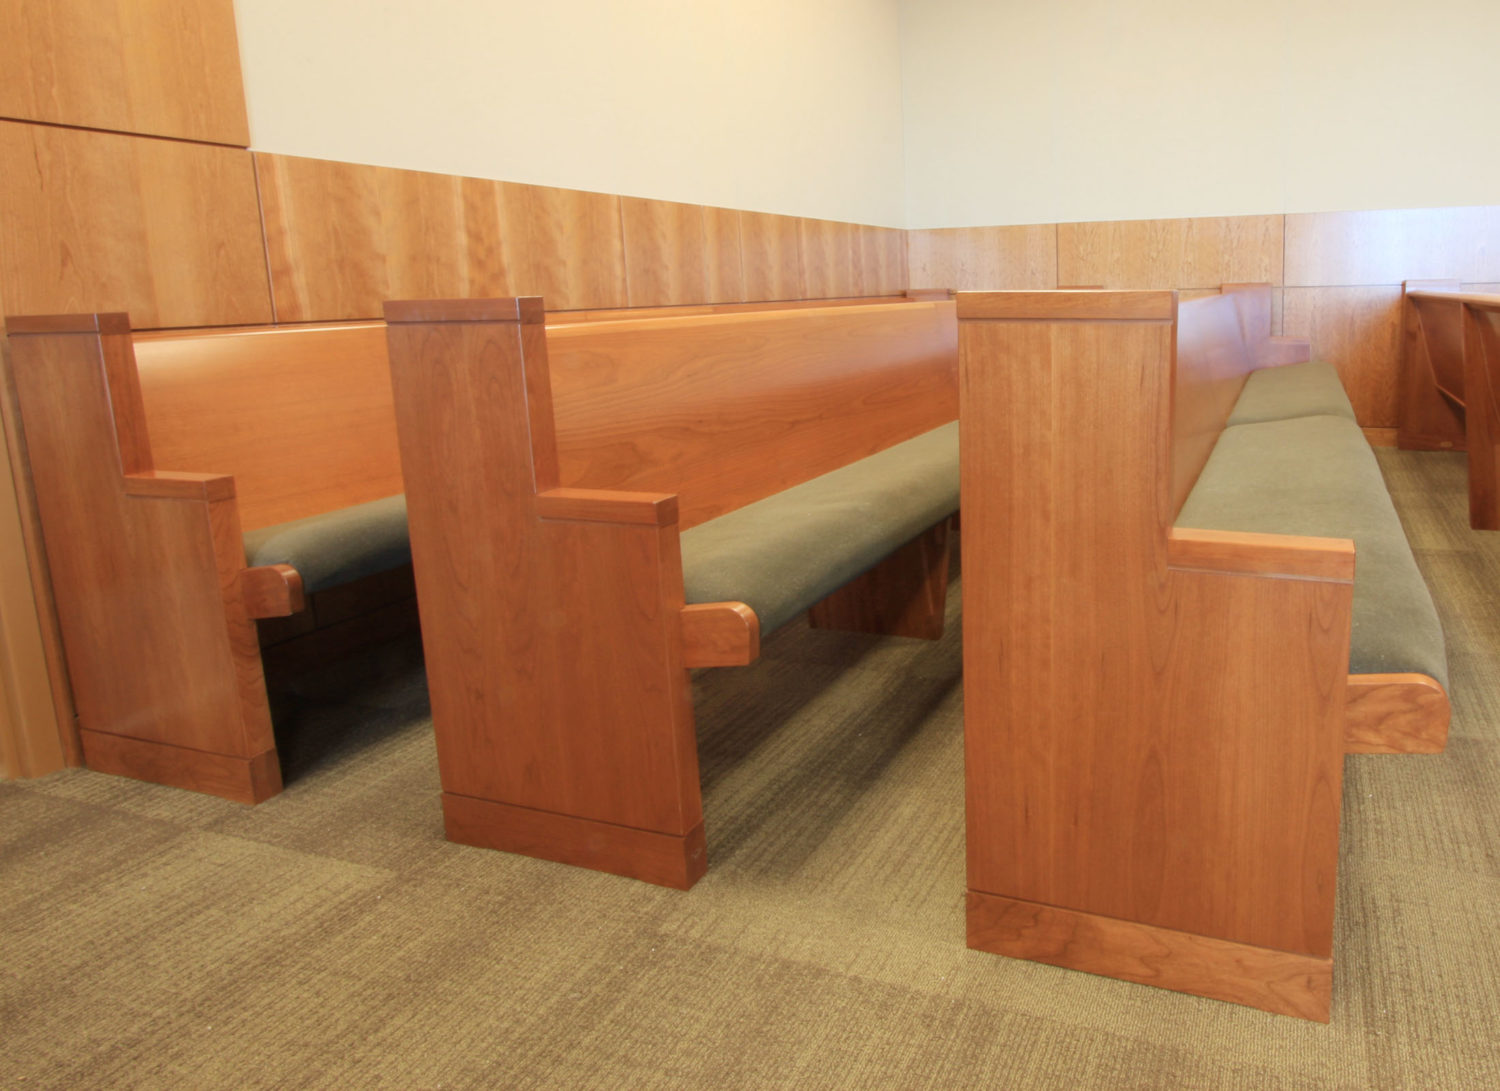 Upholstered Seat and Wood Back Benches in Gordon R Hall Courthouse - Tooele, UT